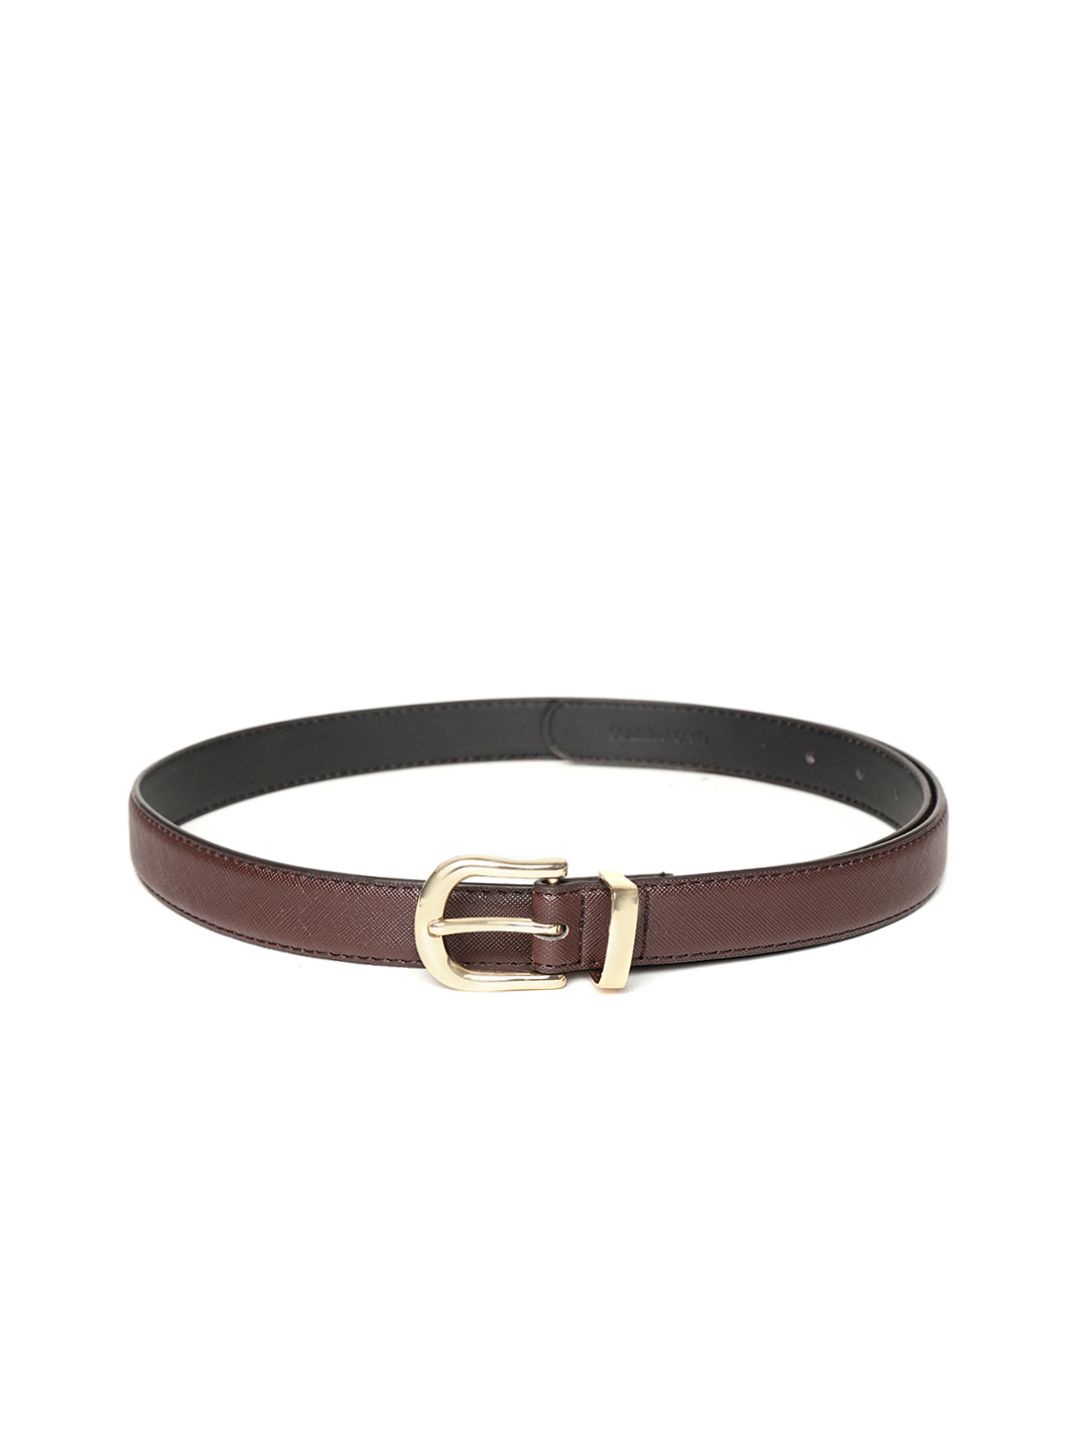 Lino Perros Women Brown Solid Belt Price in India